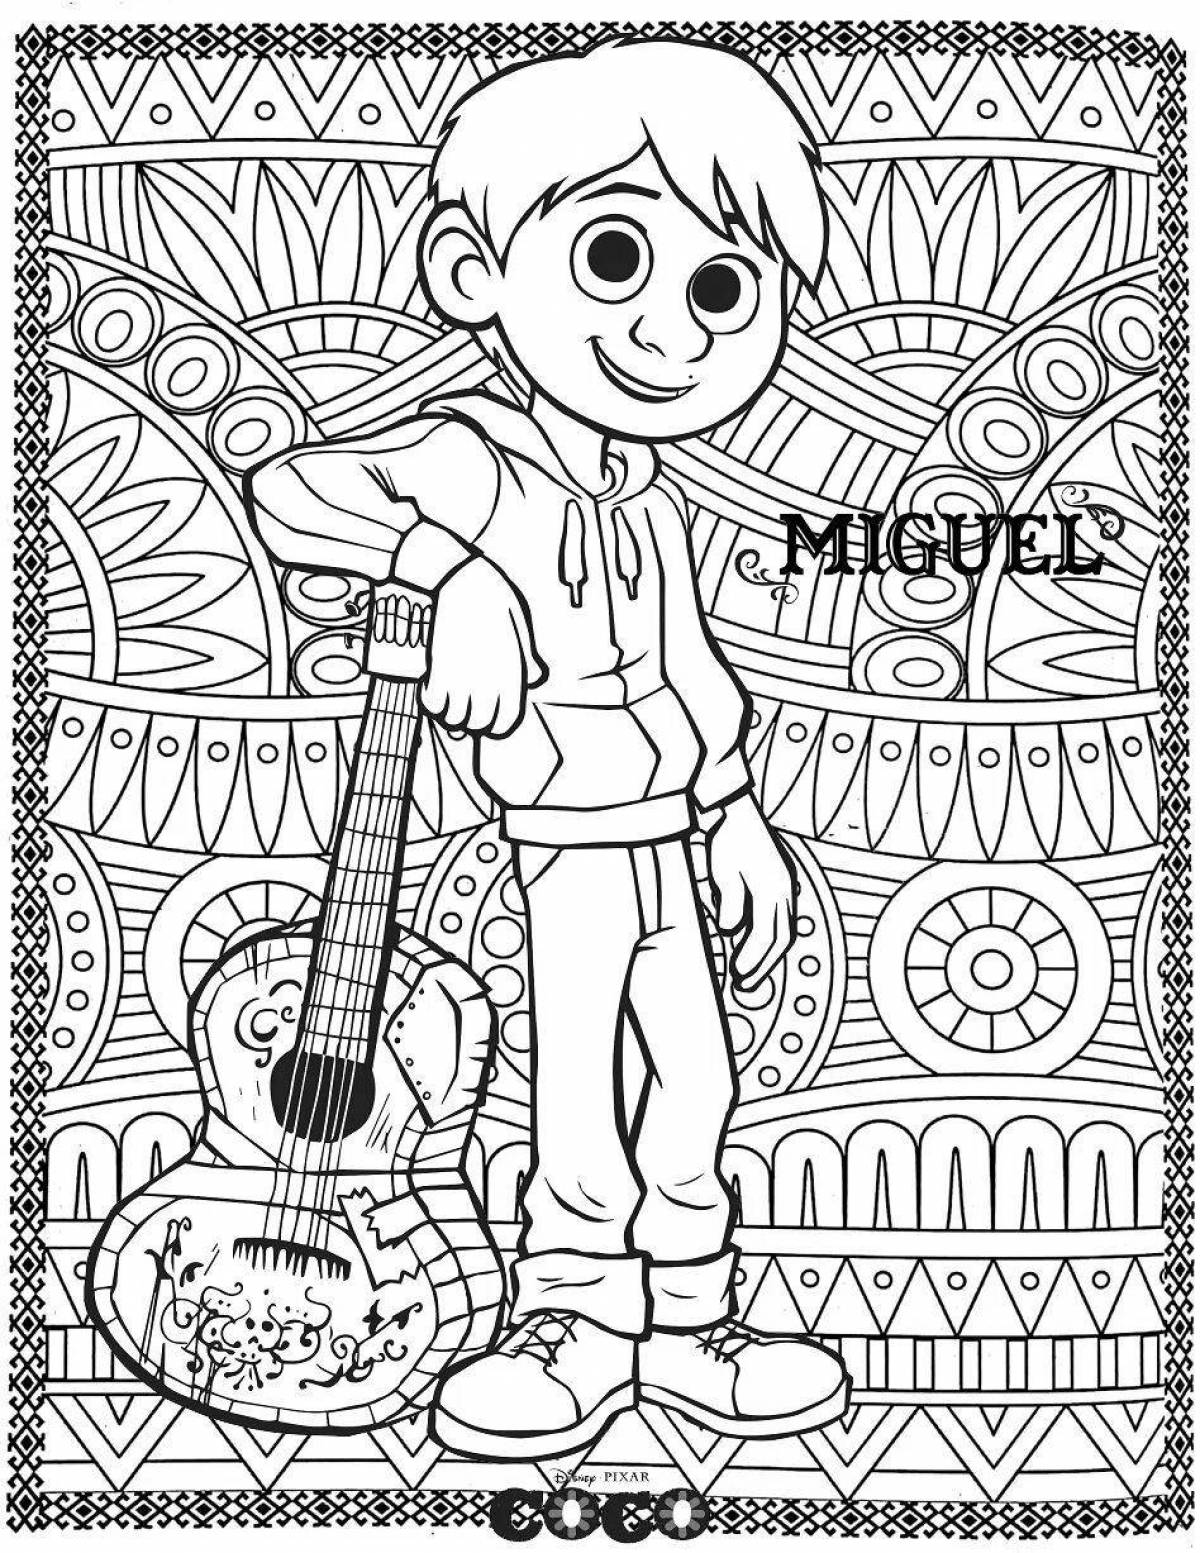 The big secret of the coloring page